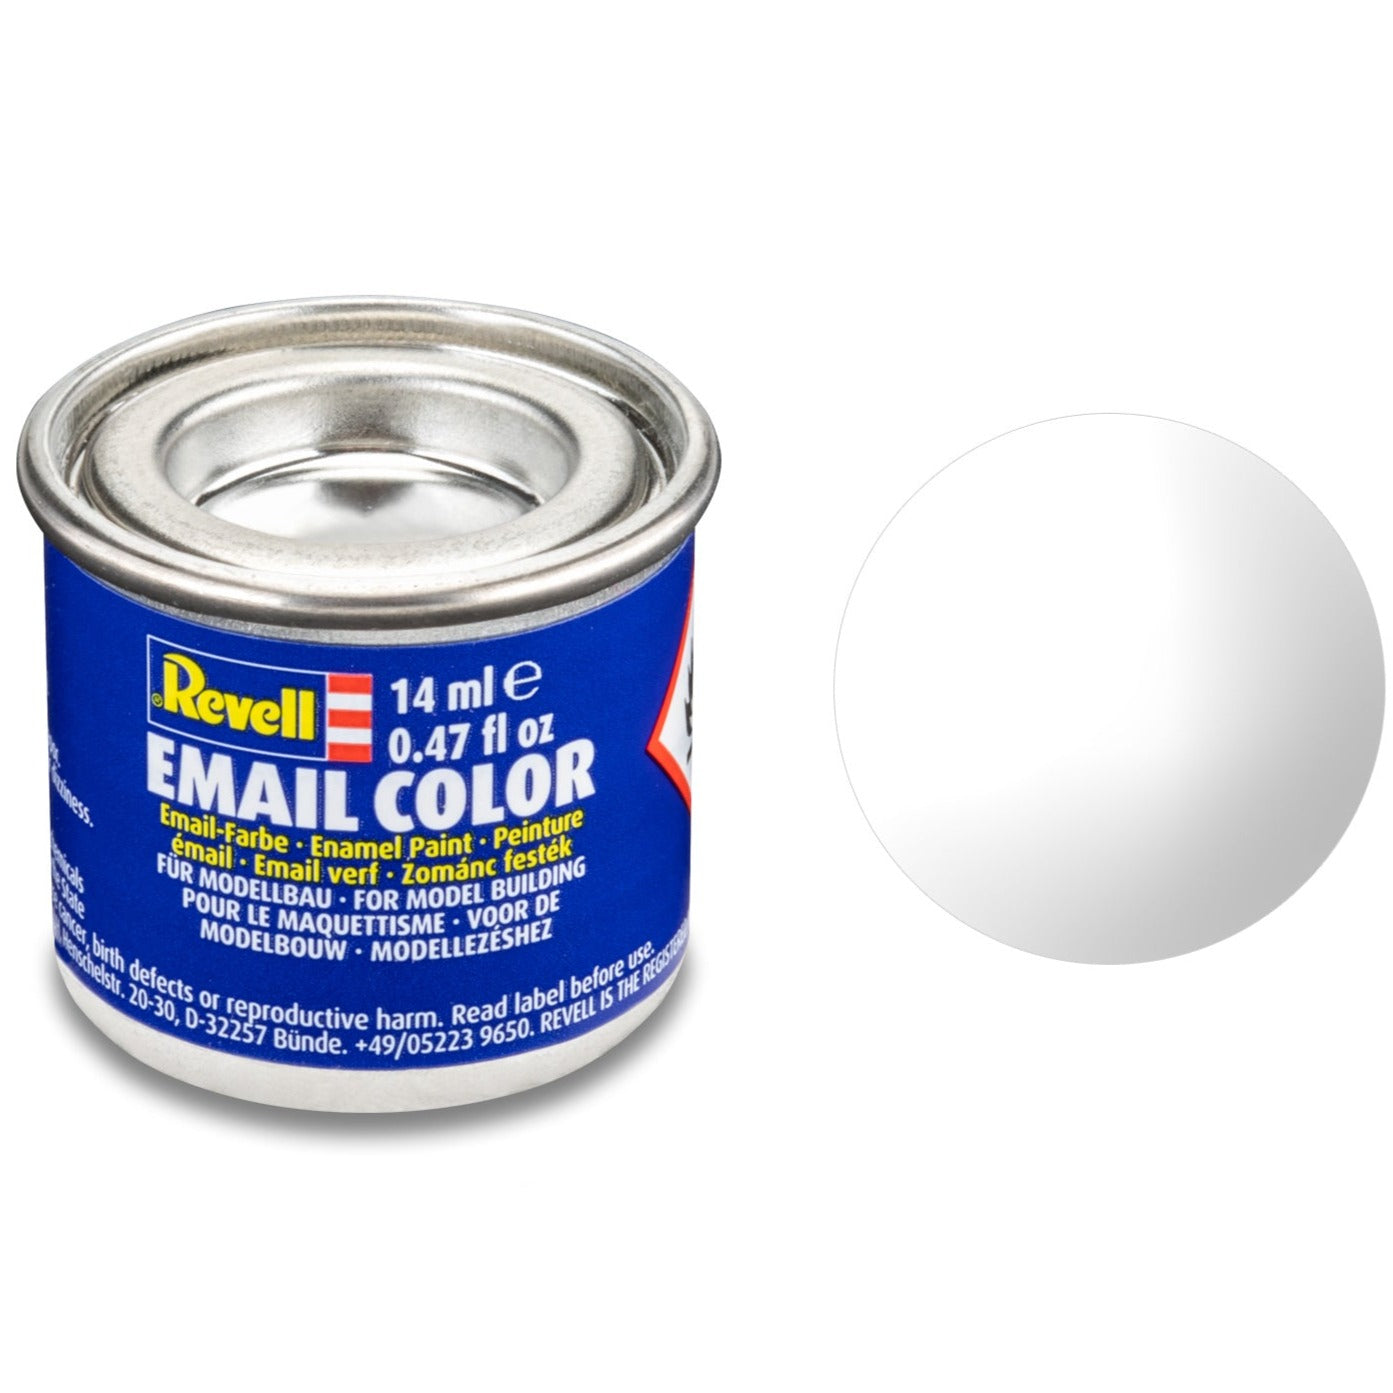 Revell "Clear Gloss" Enamel Paint - 14ml - 32101 - Loaded Dice Barry Vale of Glamorgan CF64 3HD